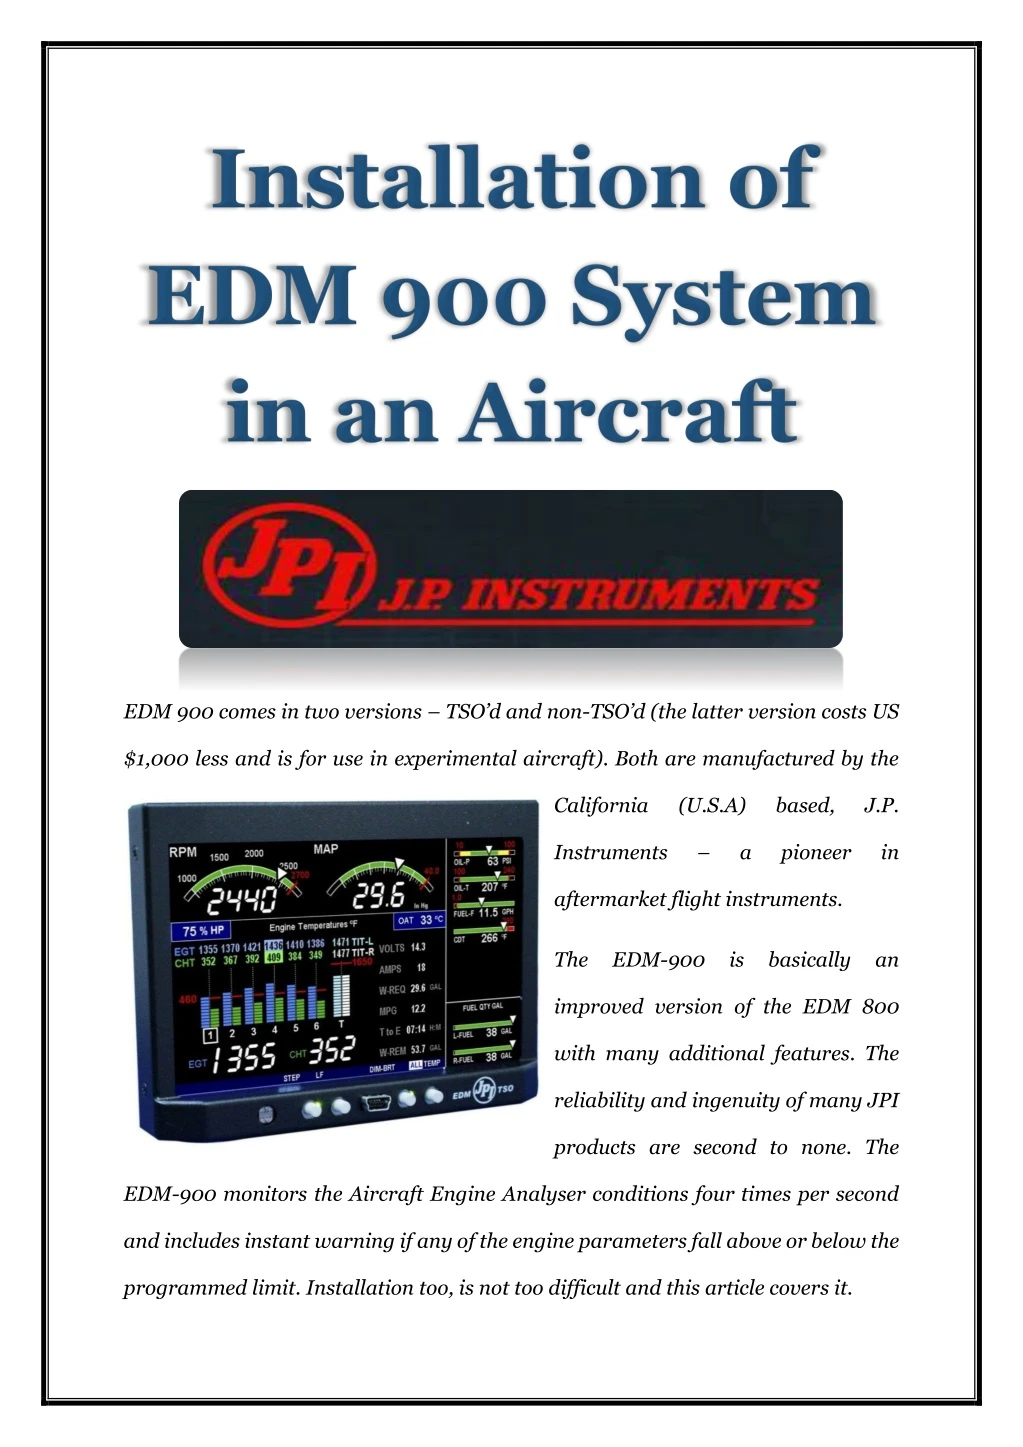 edm 900 comes in two versions